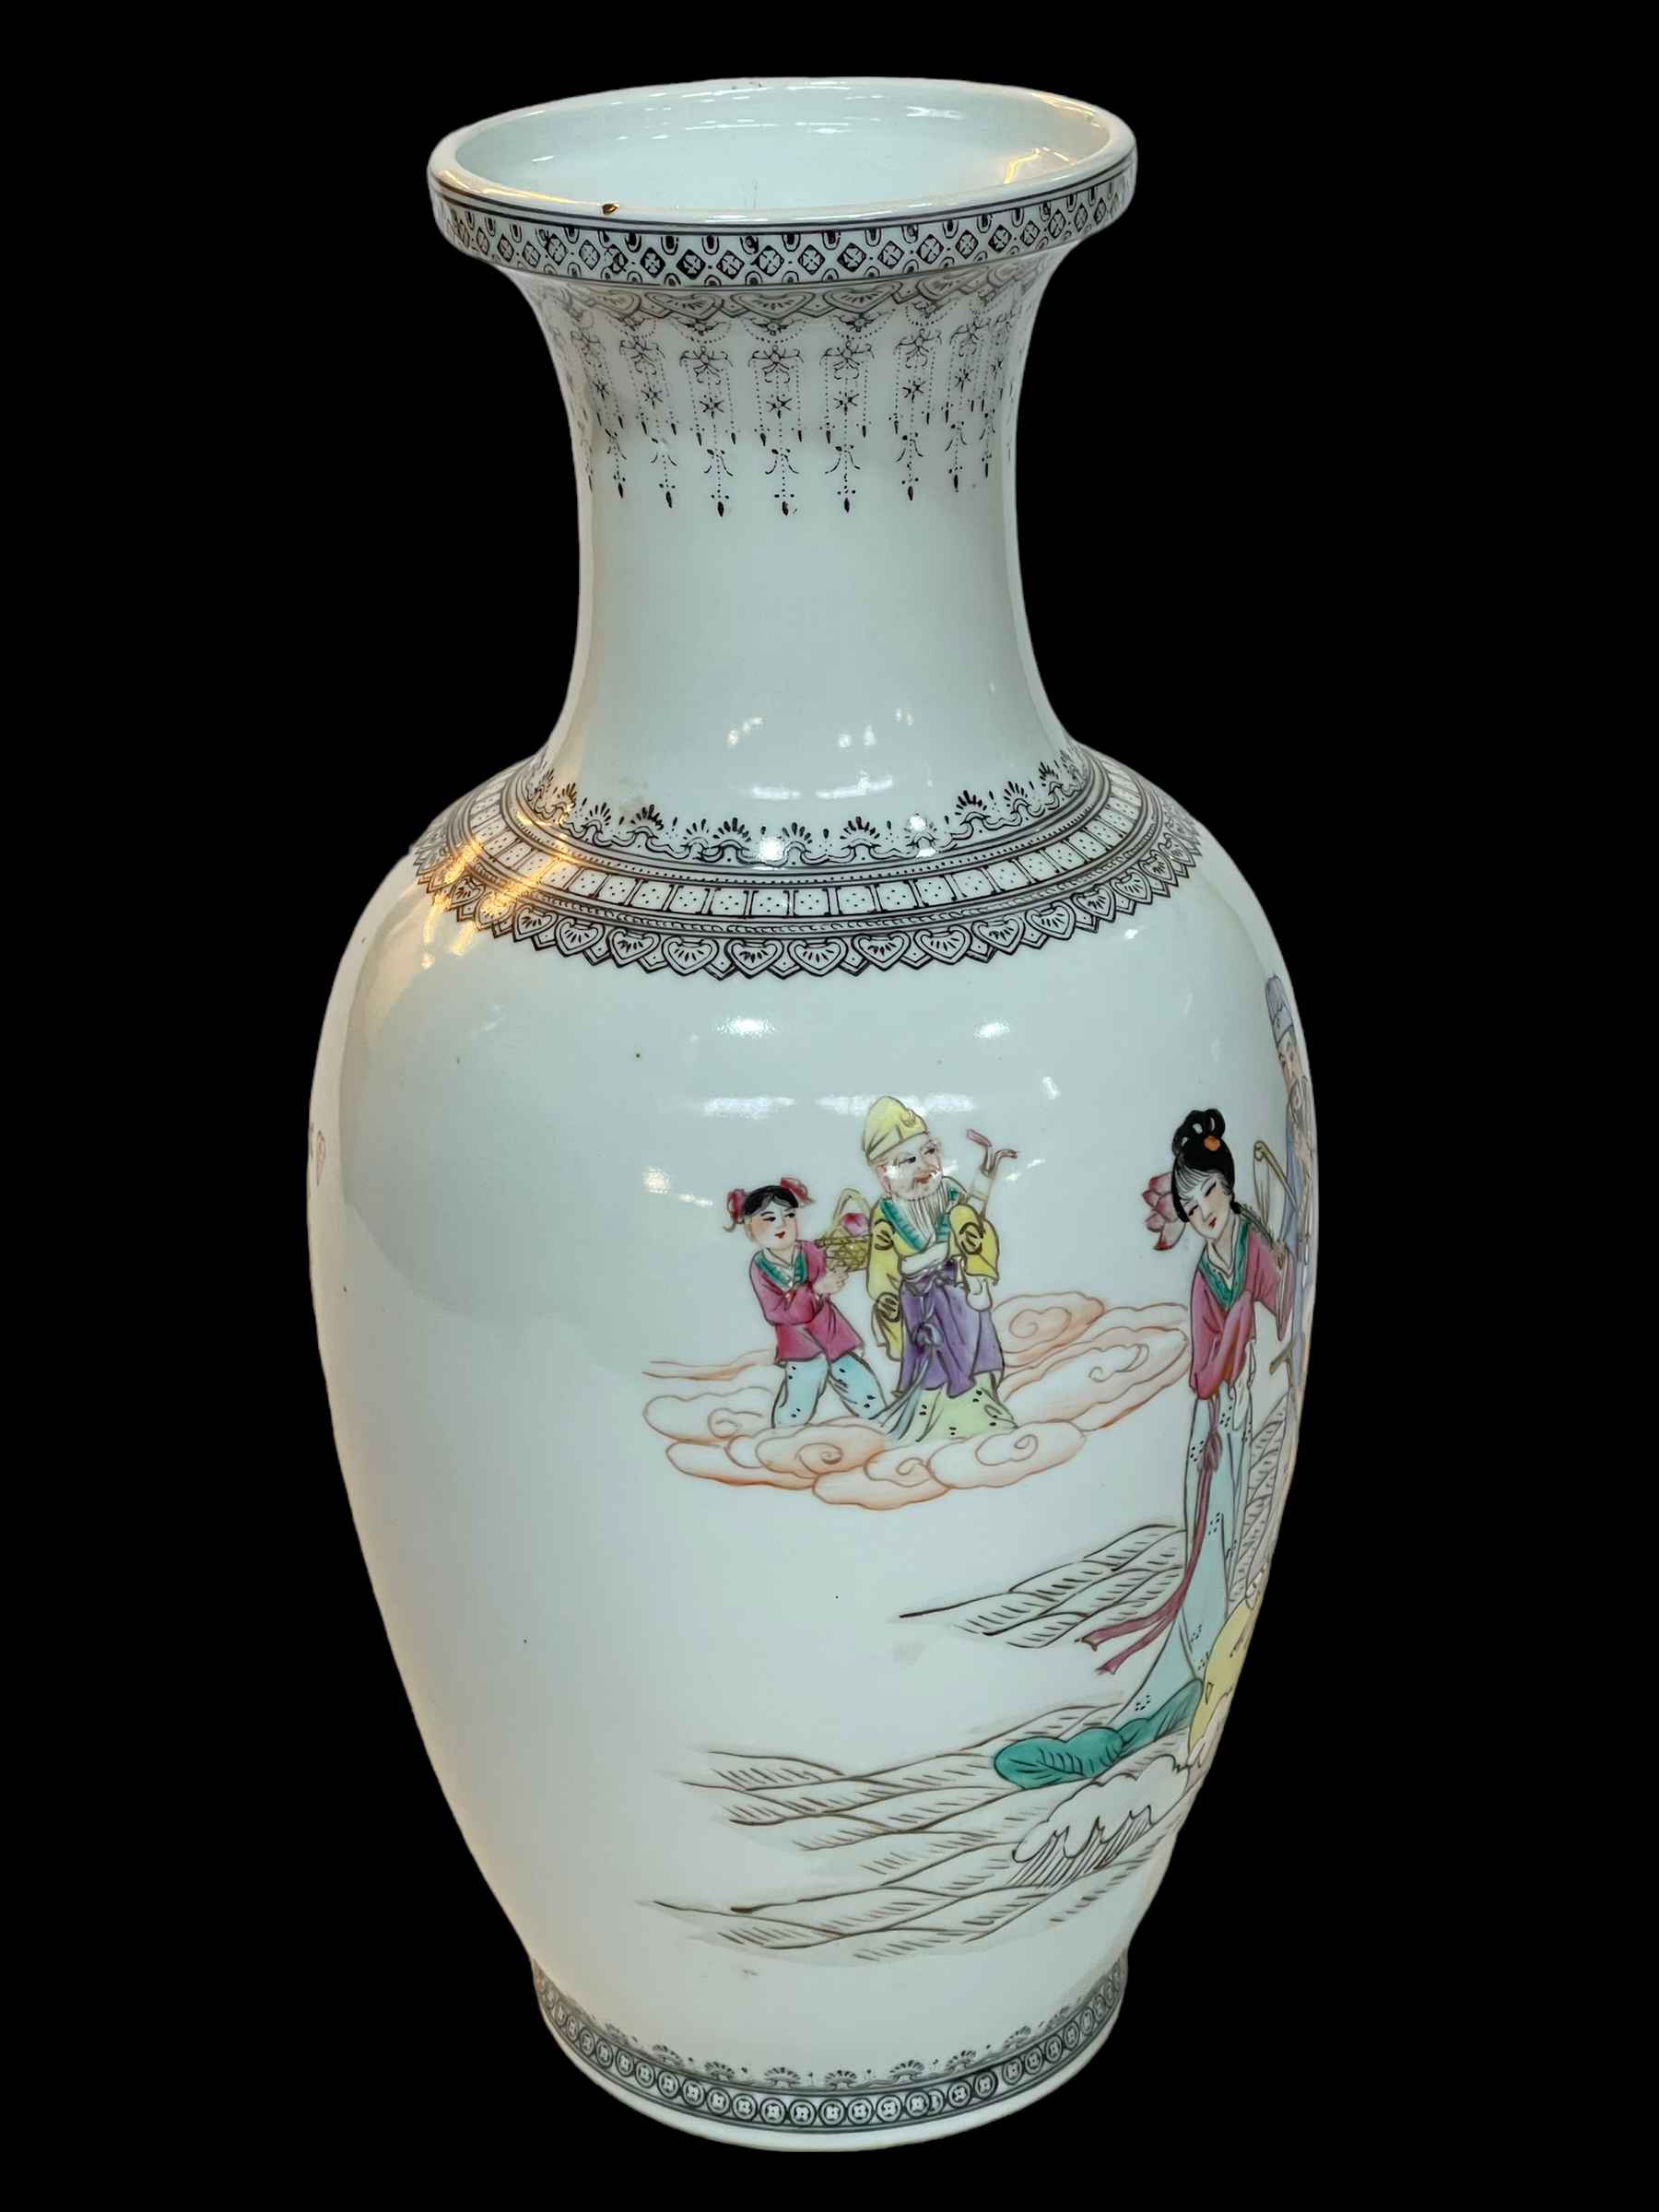 Large Chinese Republic vase decorated with figures and verse, red seal mark to base, 35.5cm. - Image 2 of 4